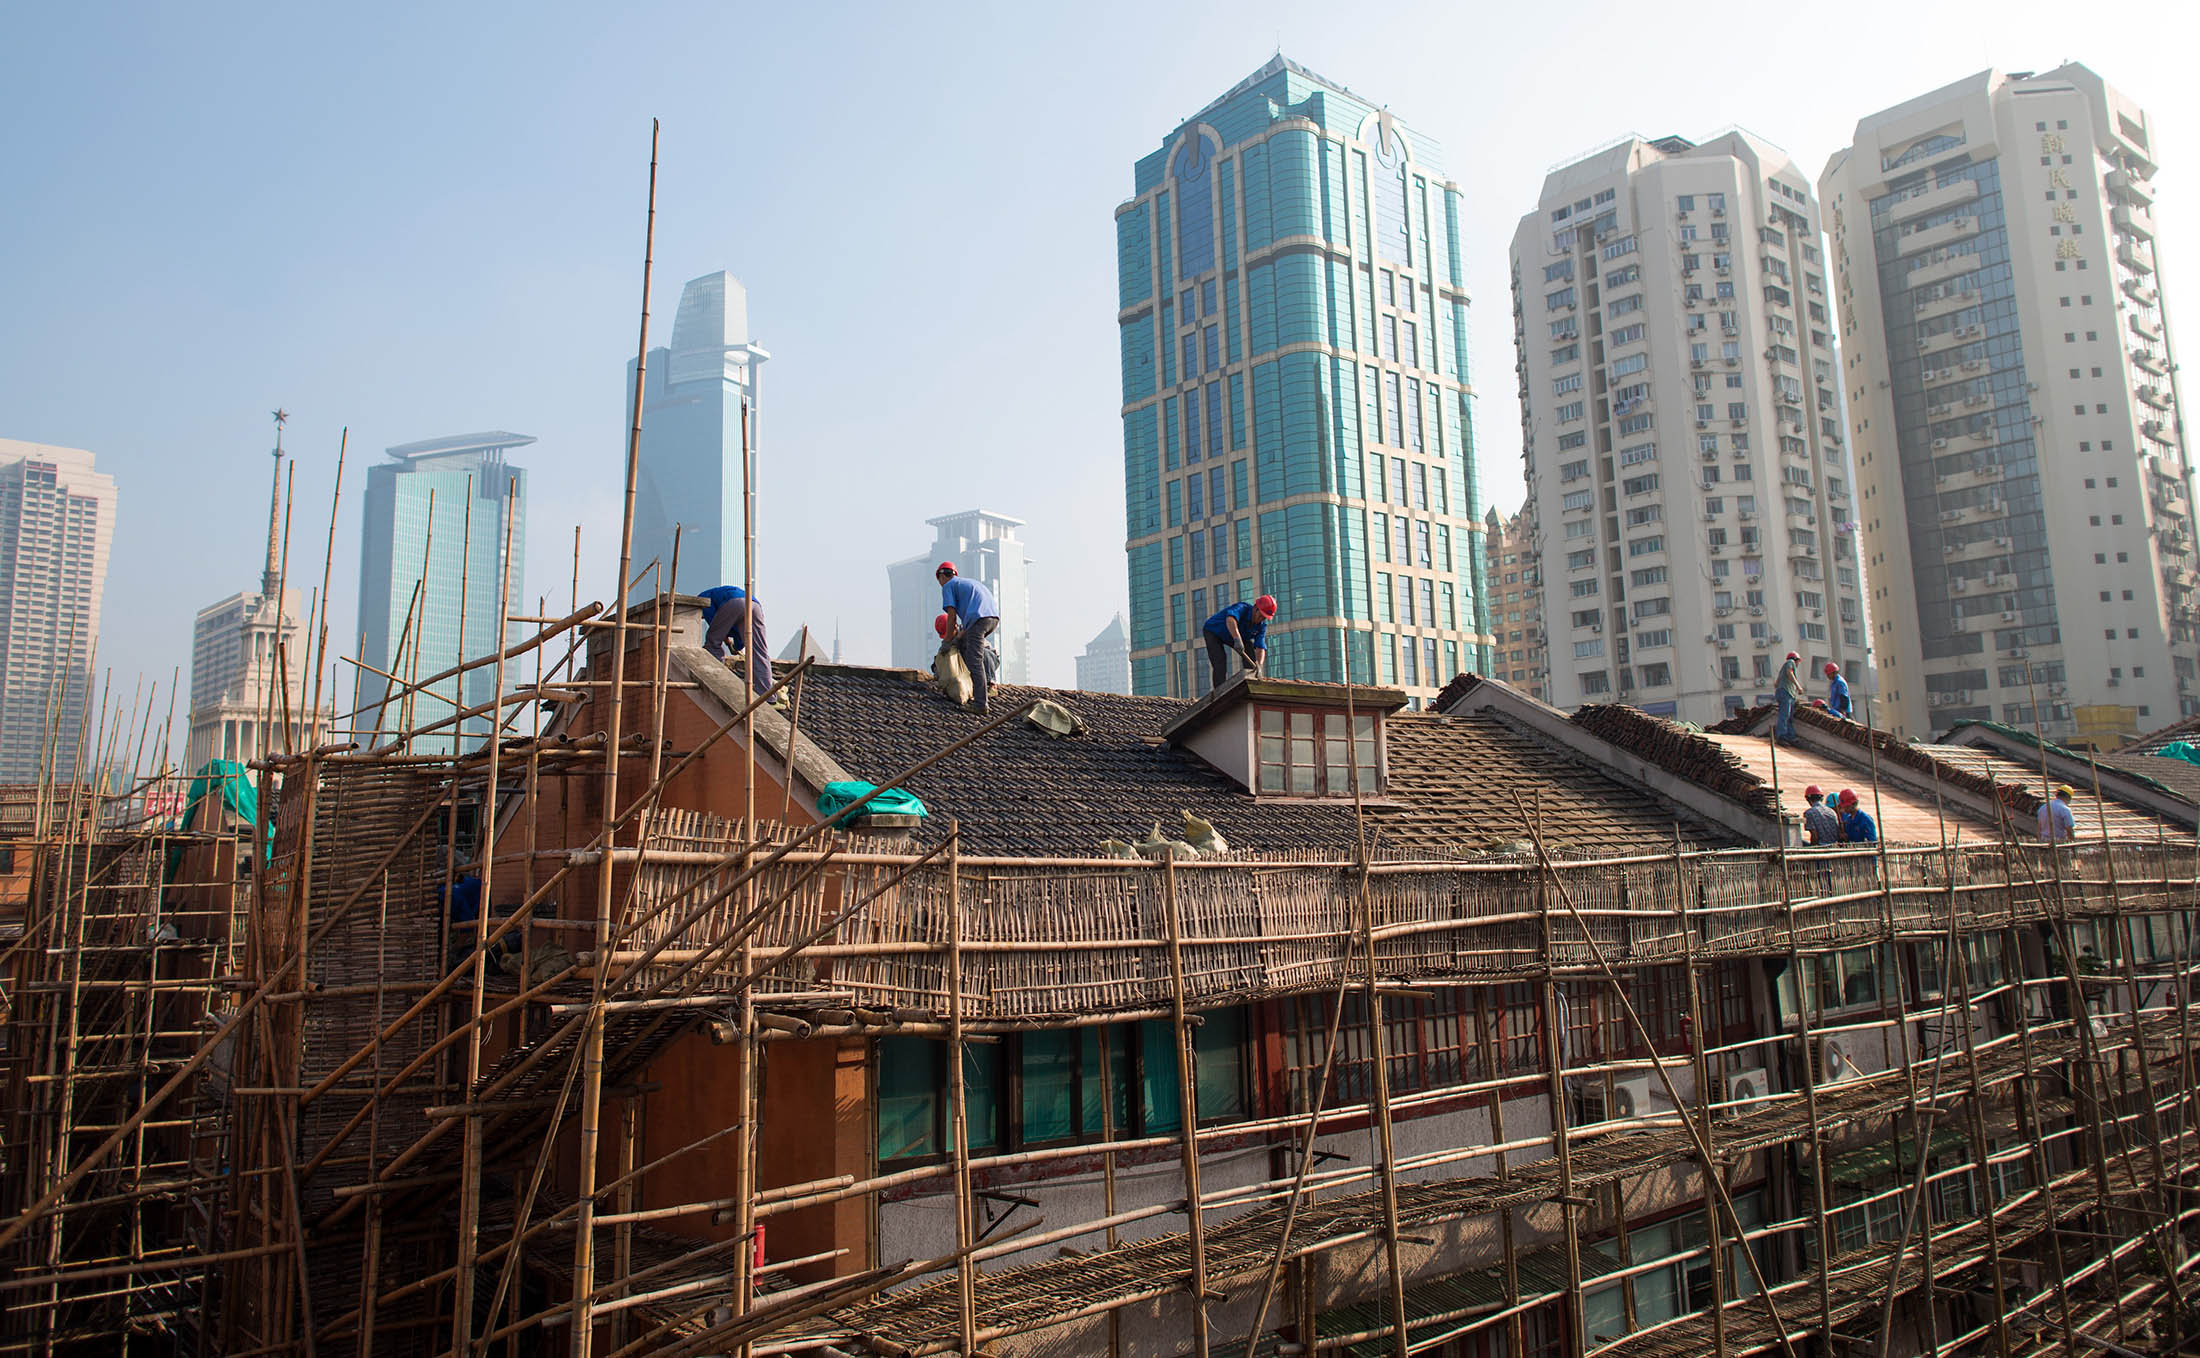 Labourers renovate a roof of a residential lane house in Shanghai on August 21, 2014. Foreign direct investment (FDI) into China dropped by more than a sixth year-on-year to a two-year low in July, the government said, but denied any link to Beijing's multiple probes into foreign companies. AFP PHOTO / JOHANNES EISELE (Photo credit should read JOHANNES EISELE/AFP/Getty Images)
